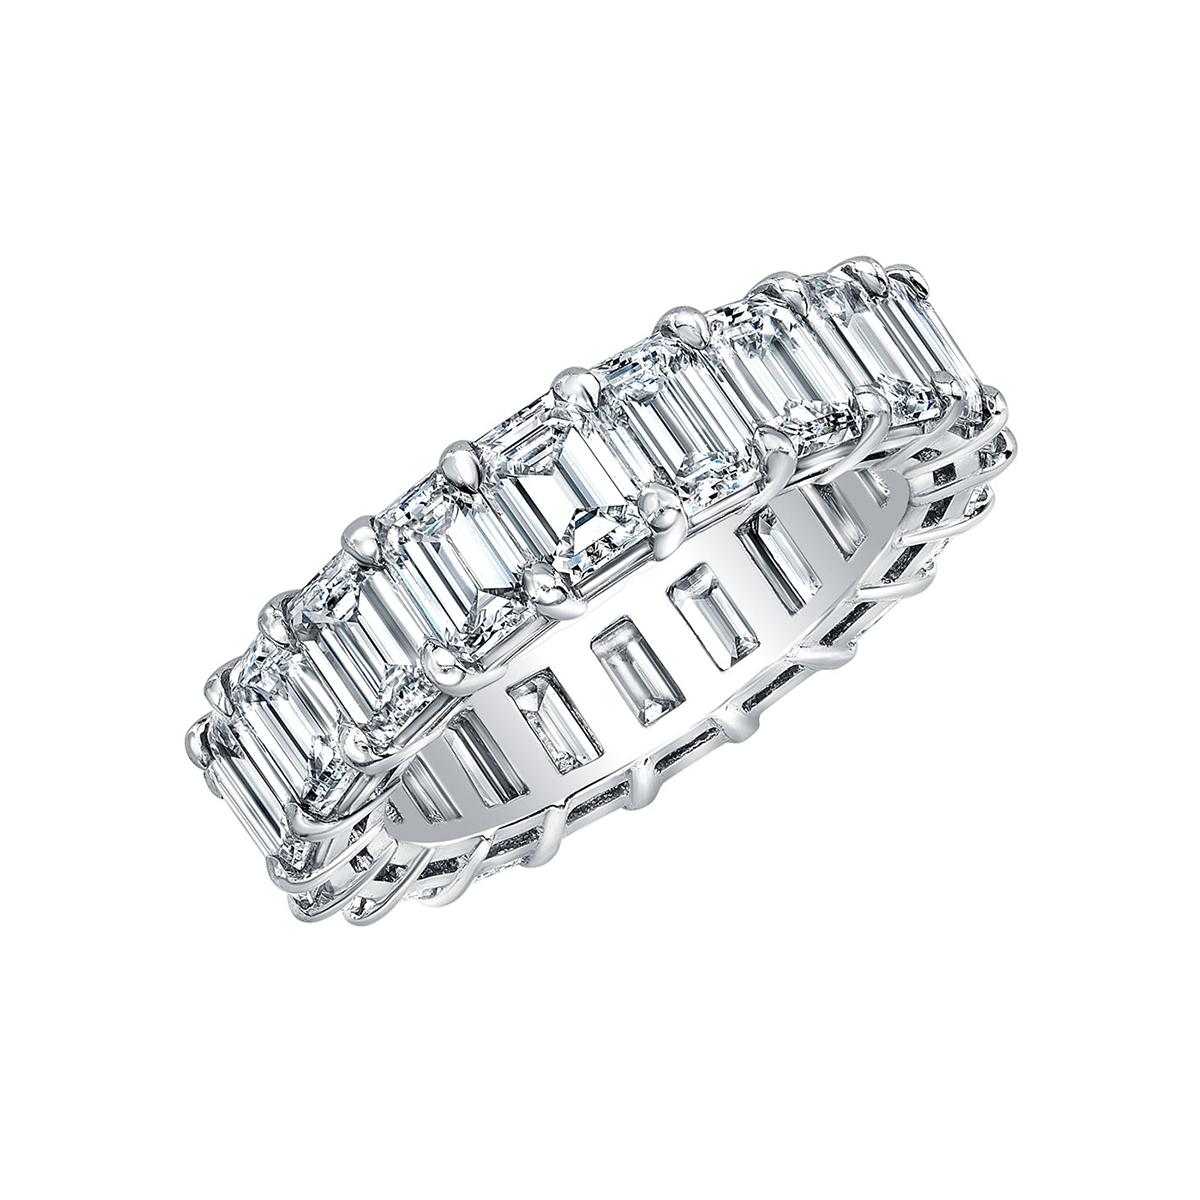 Eternity band ring, showcasing fine colorless emerald-cut diamonds mounted in a shared-prong platinum setting.

Twenty diamonds weighing 6.35 total carats (E-F color, VVS1-VVS2 clarity)
Size 6